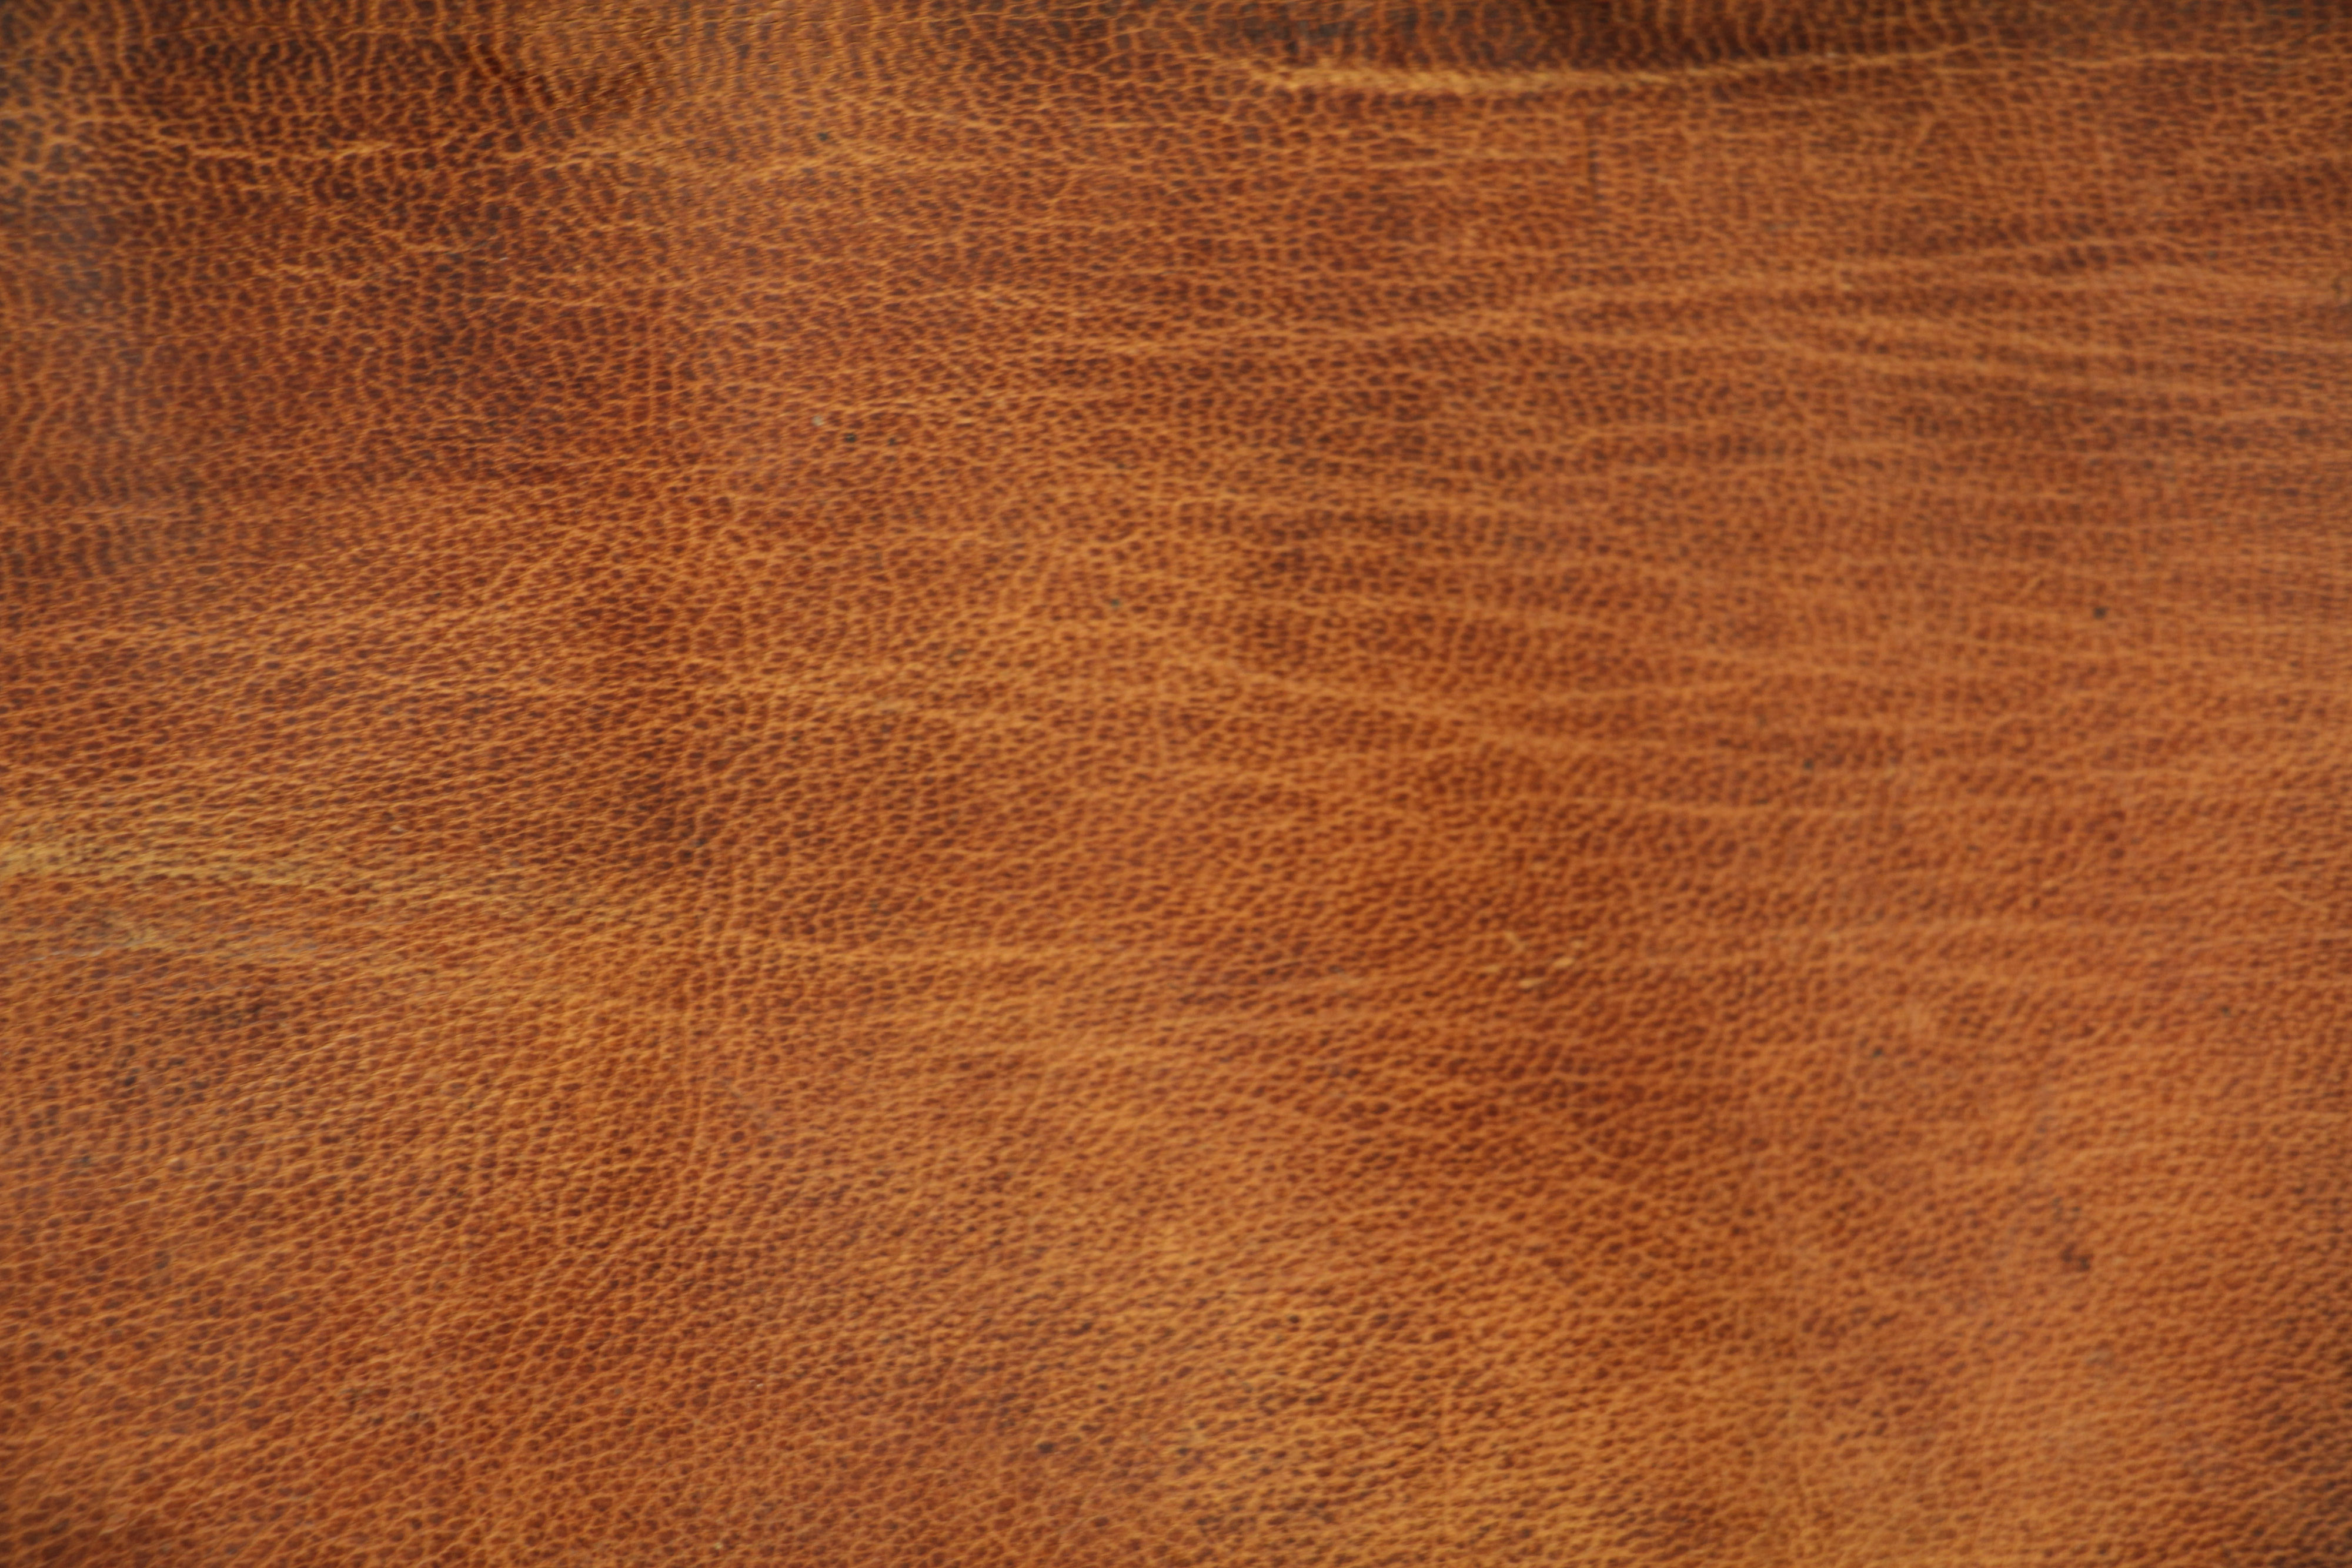 Tooled Leather Texture